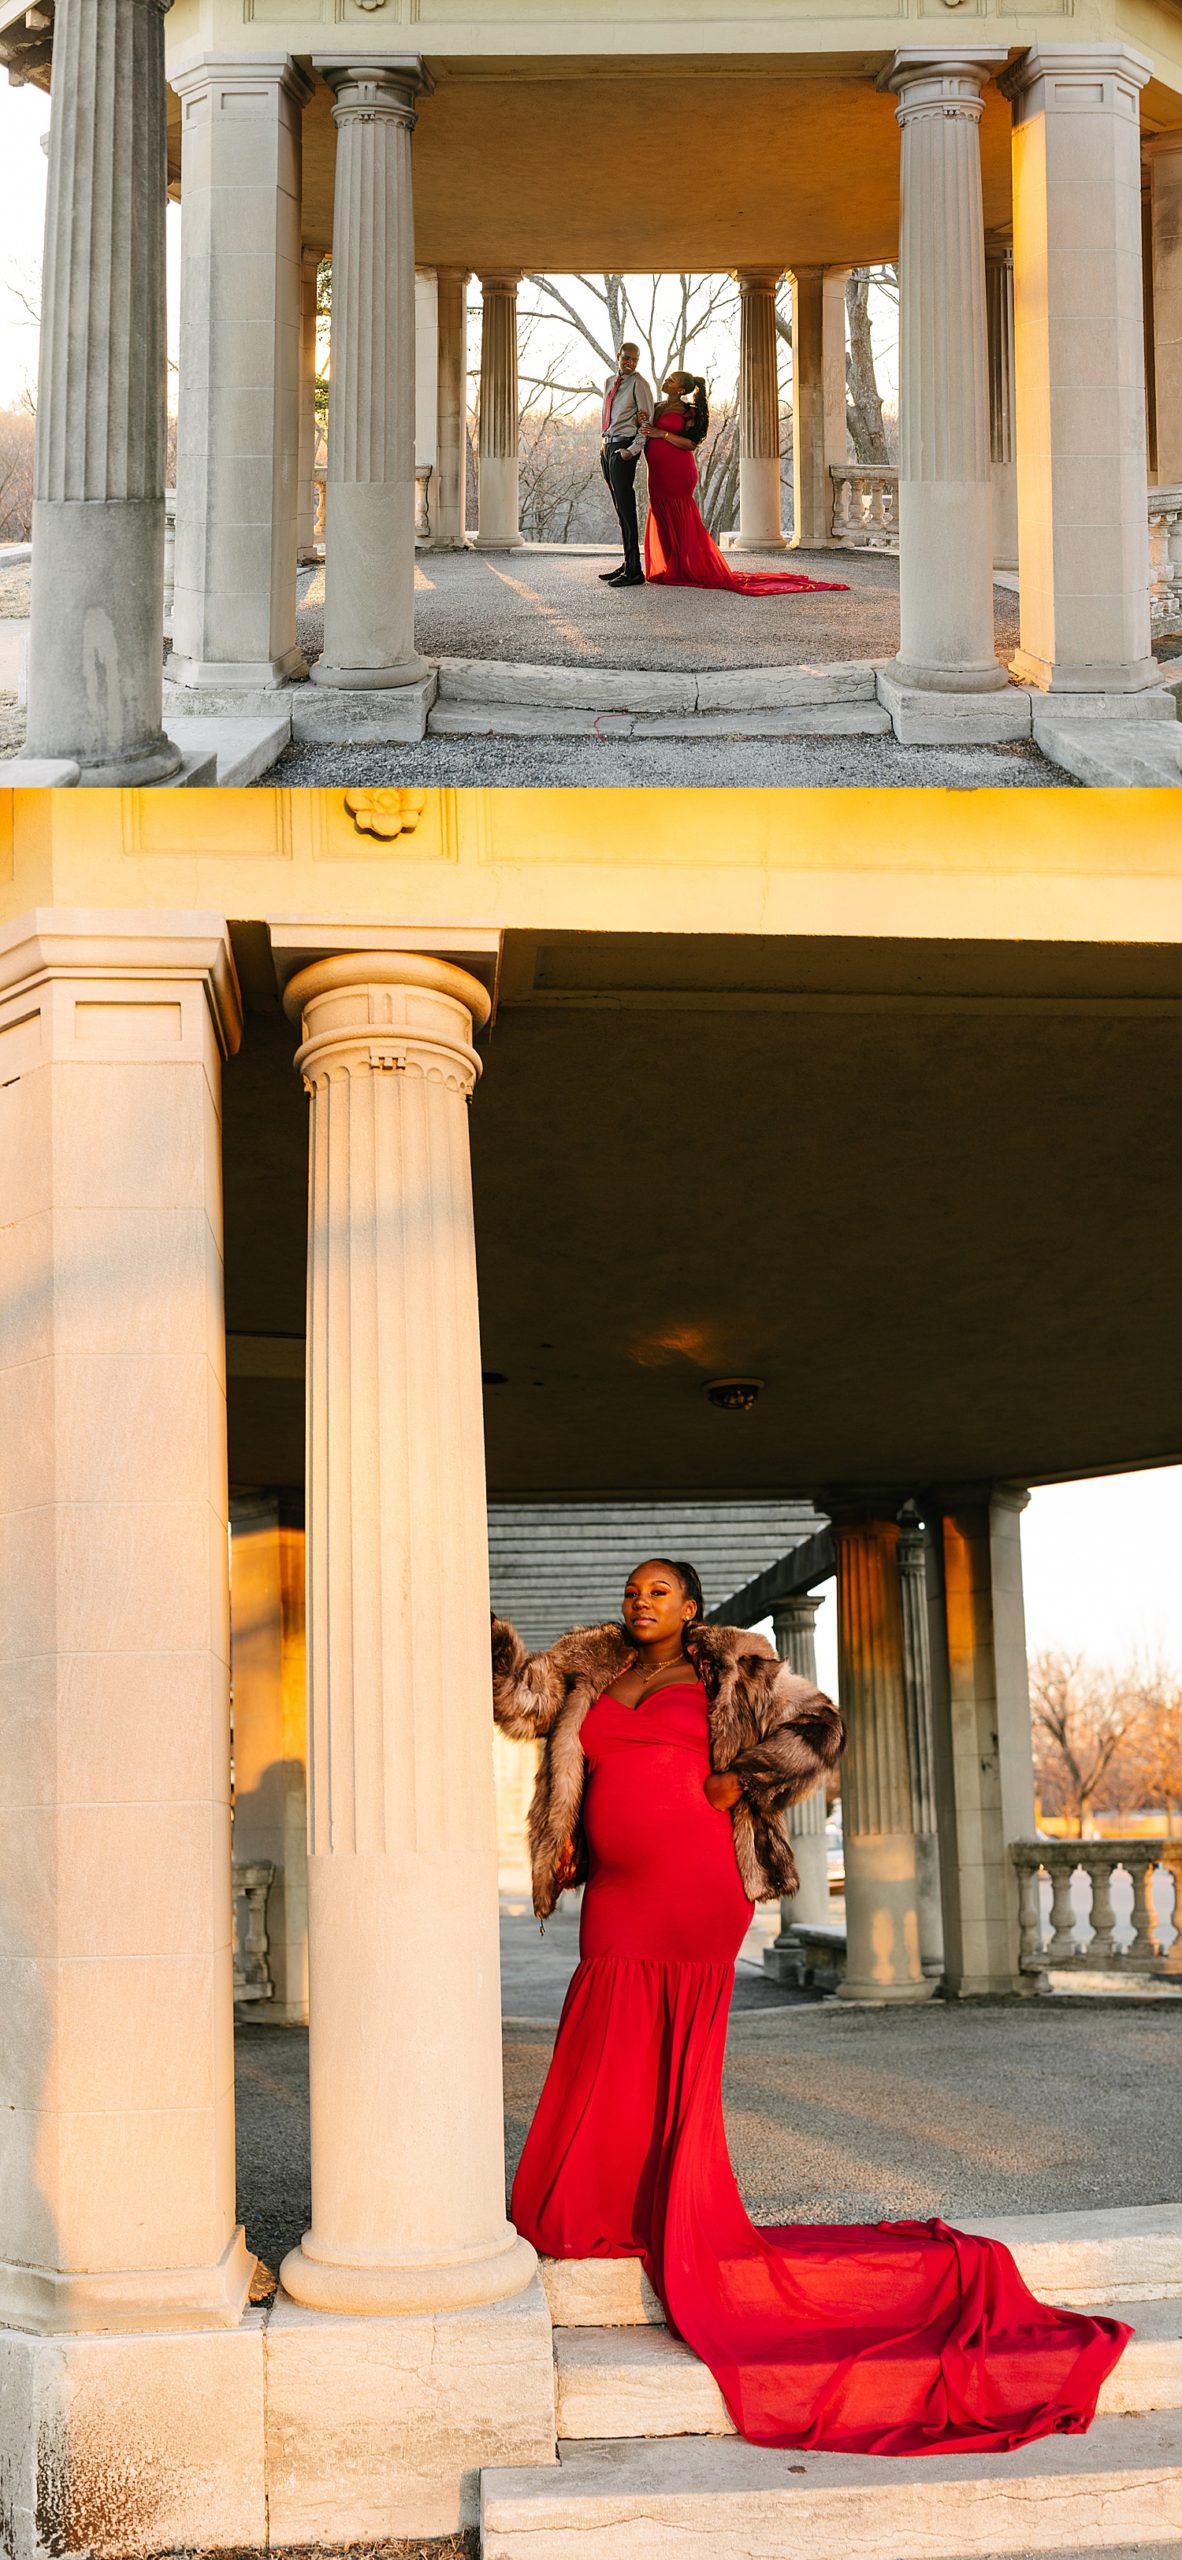 new mom at maternity session with Kansas City photographer during sunset wearing long red dress